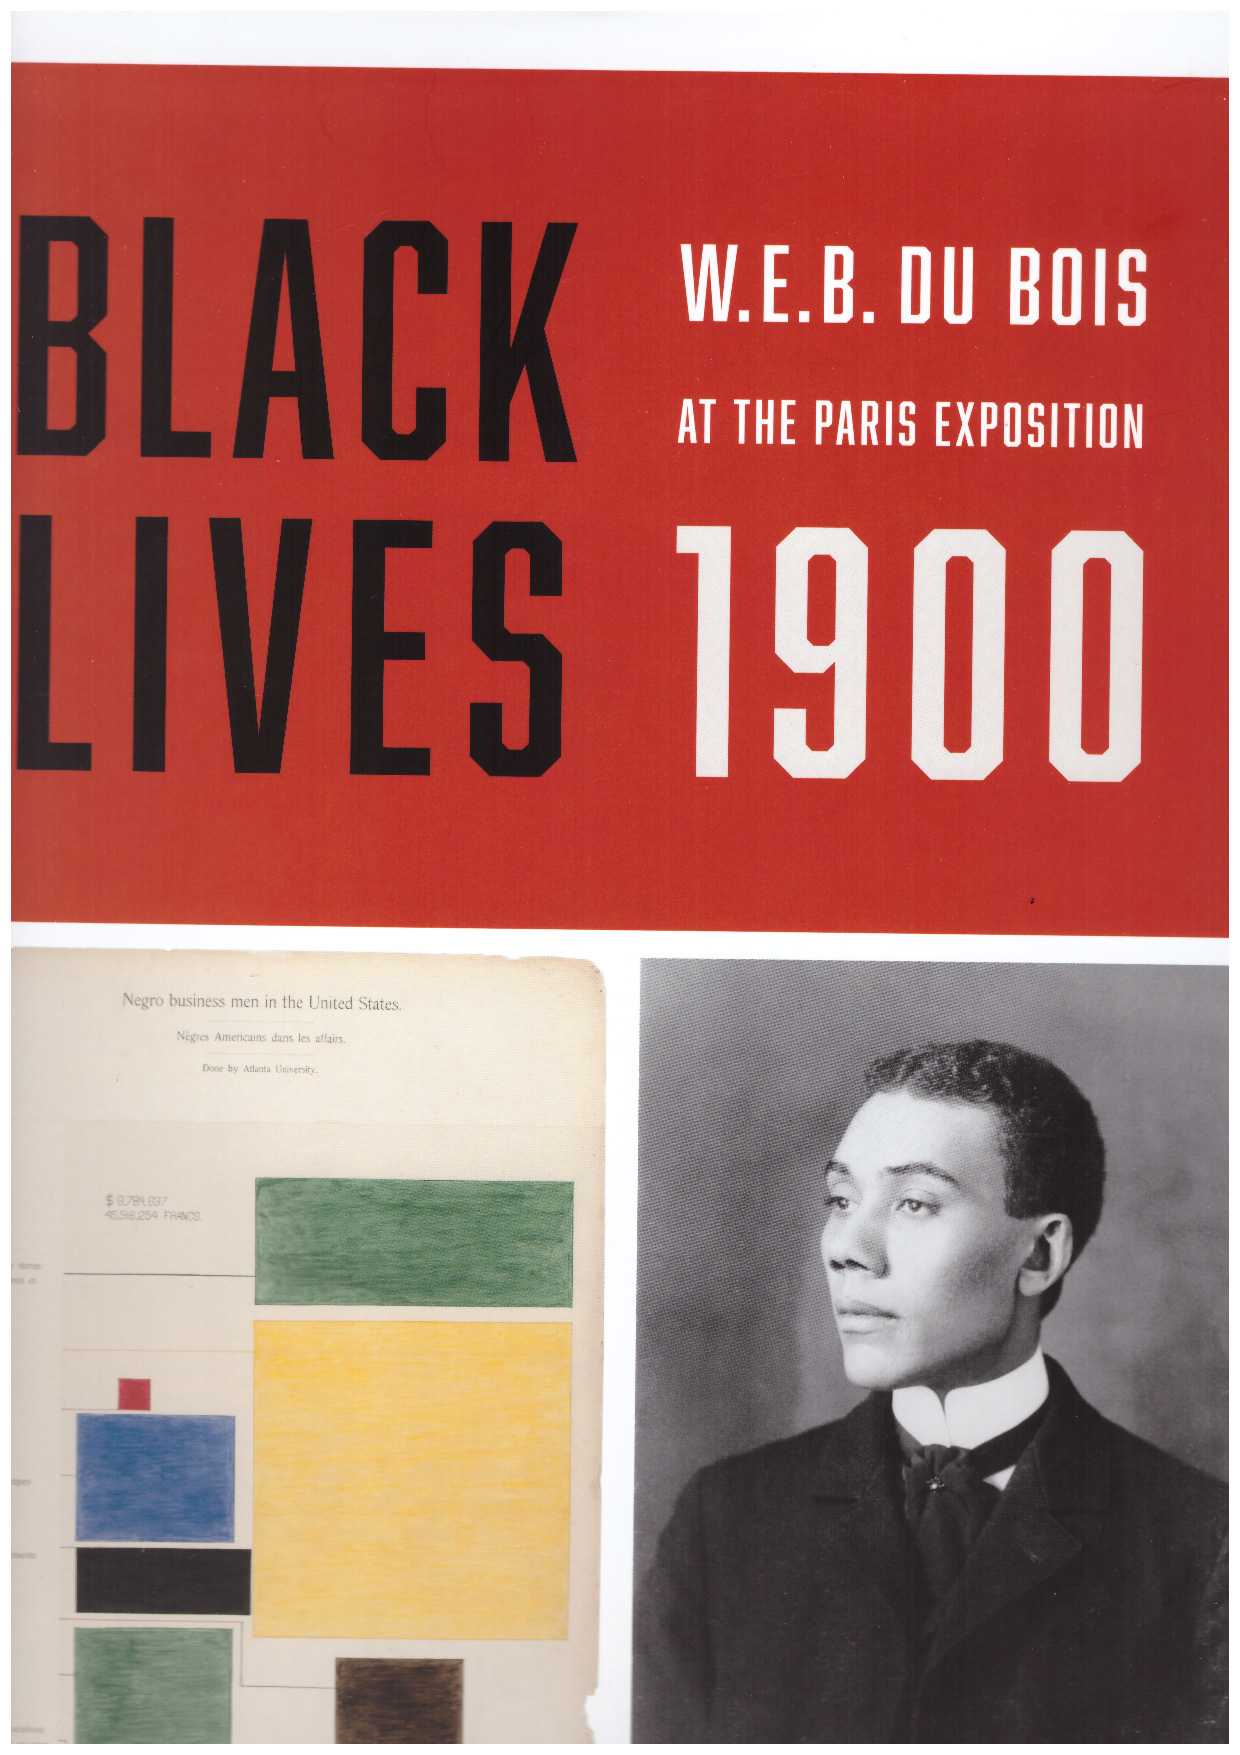 DU BOIS, W. E. B. - Black Lives 1900 -  W.E.B. Du Bois at the Paris Exposition